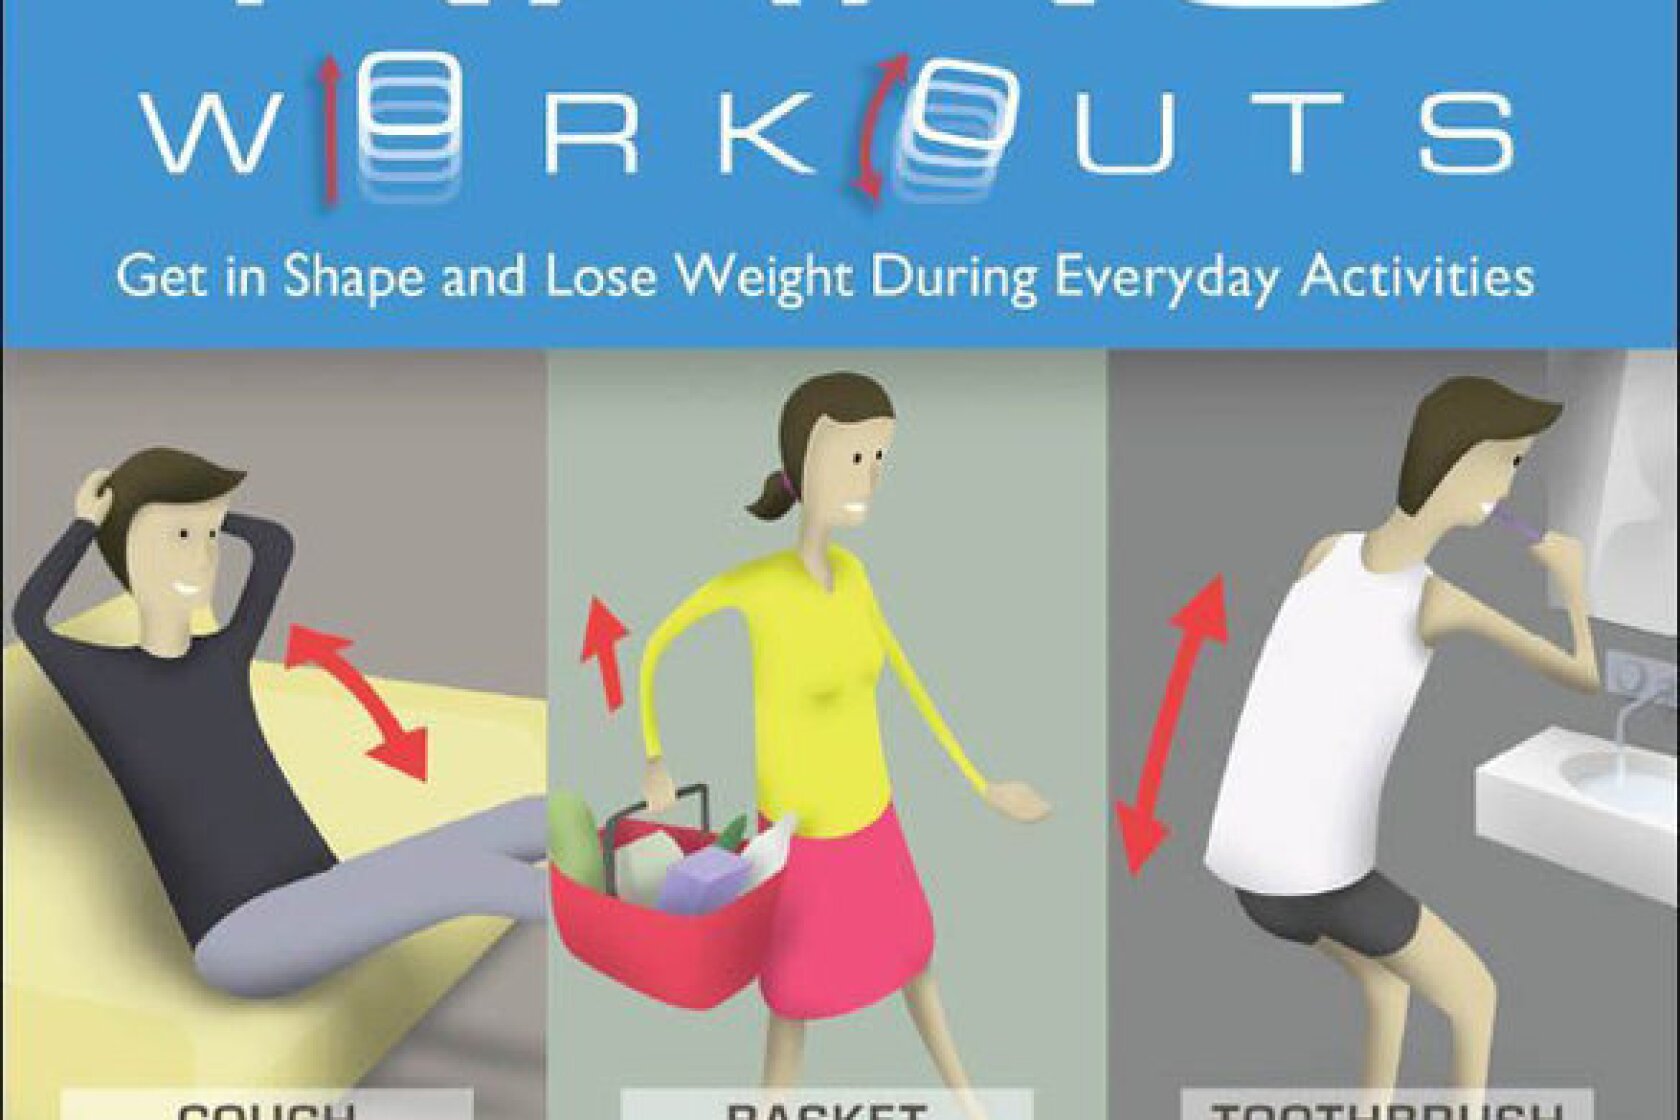 Compact Exercise Aids That Work For Dorm Room Workouts Los